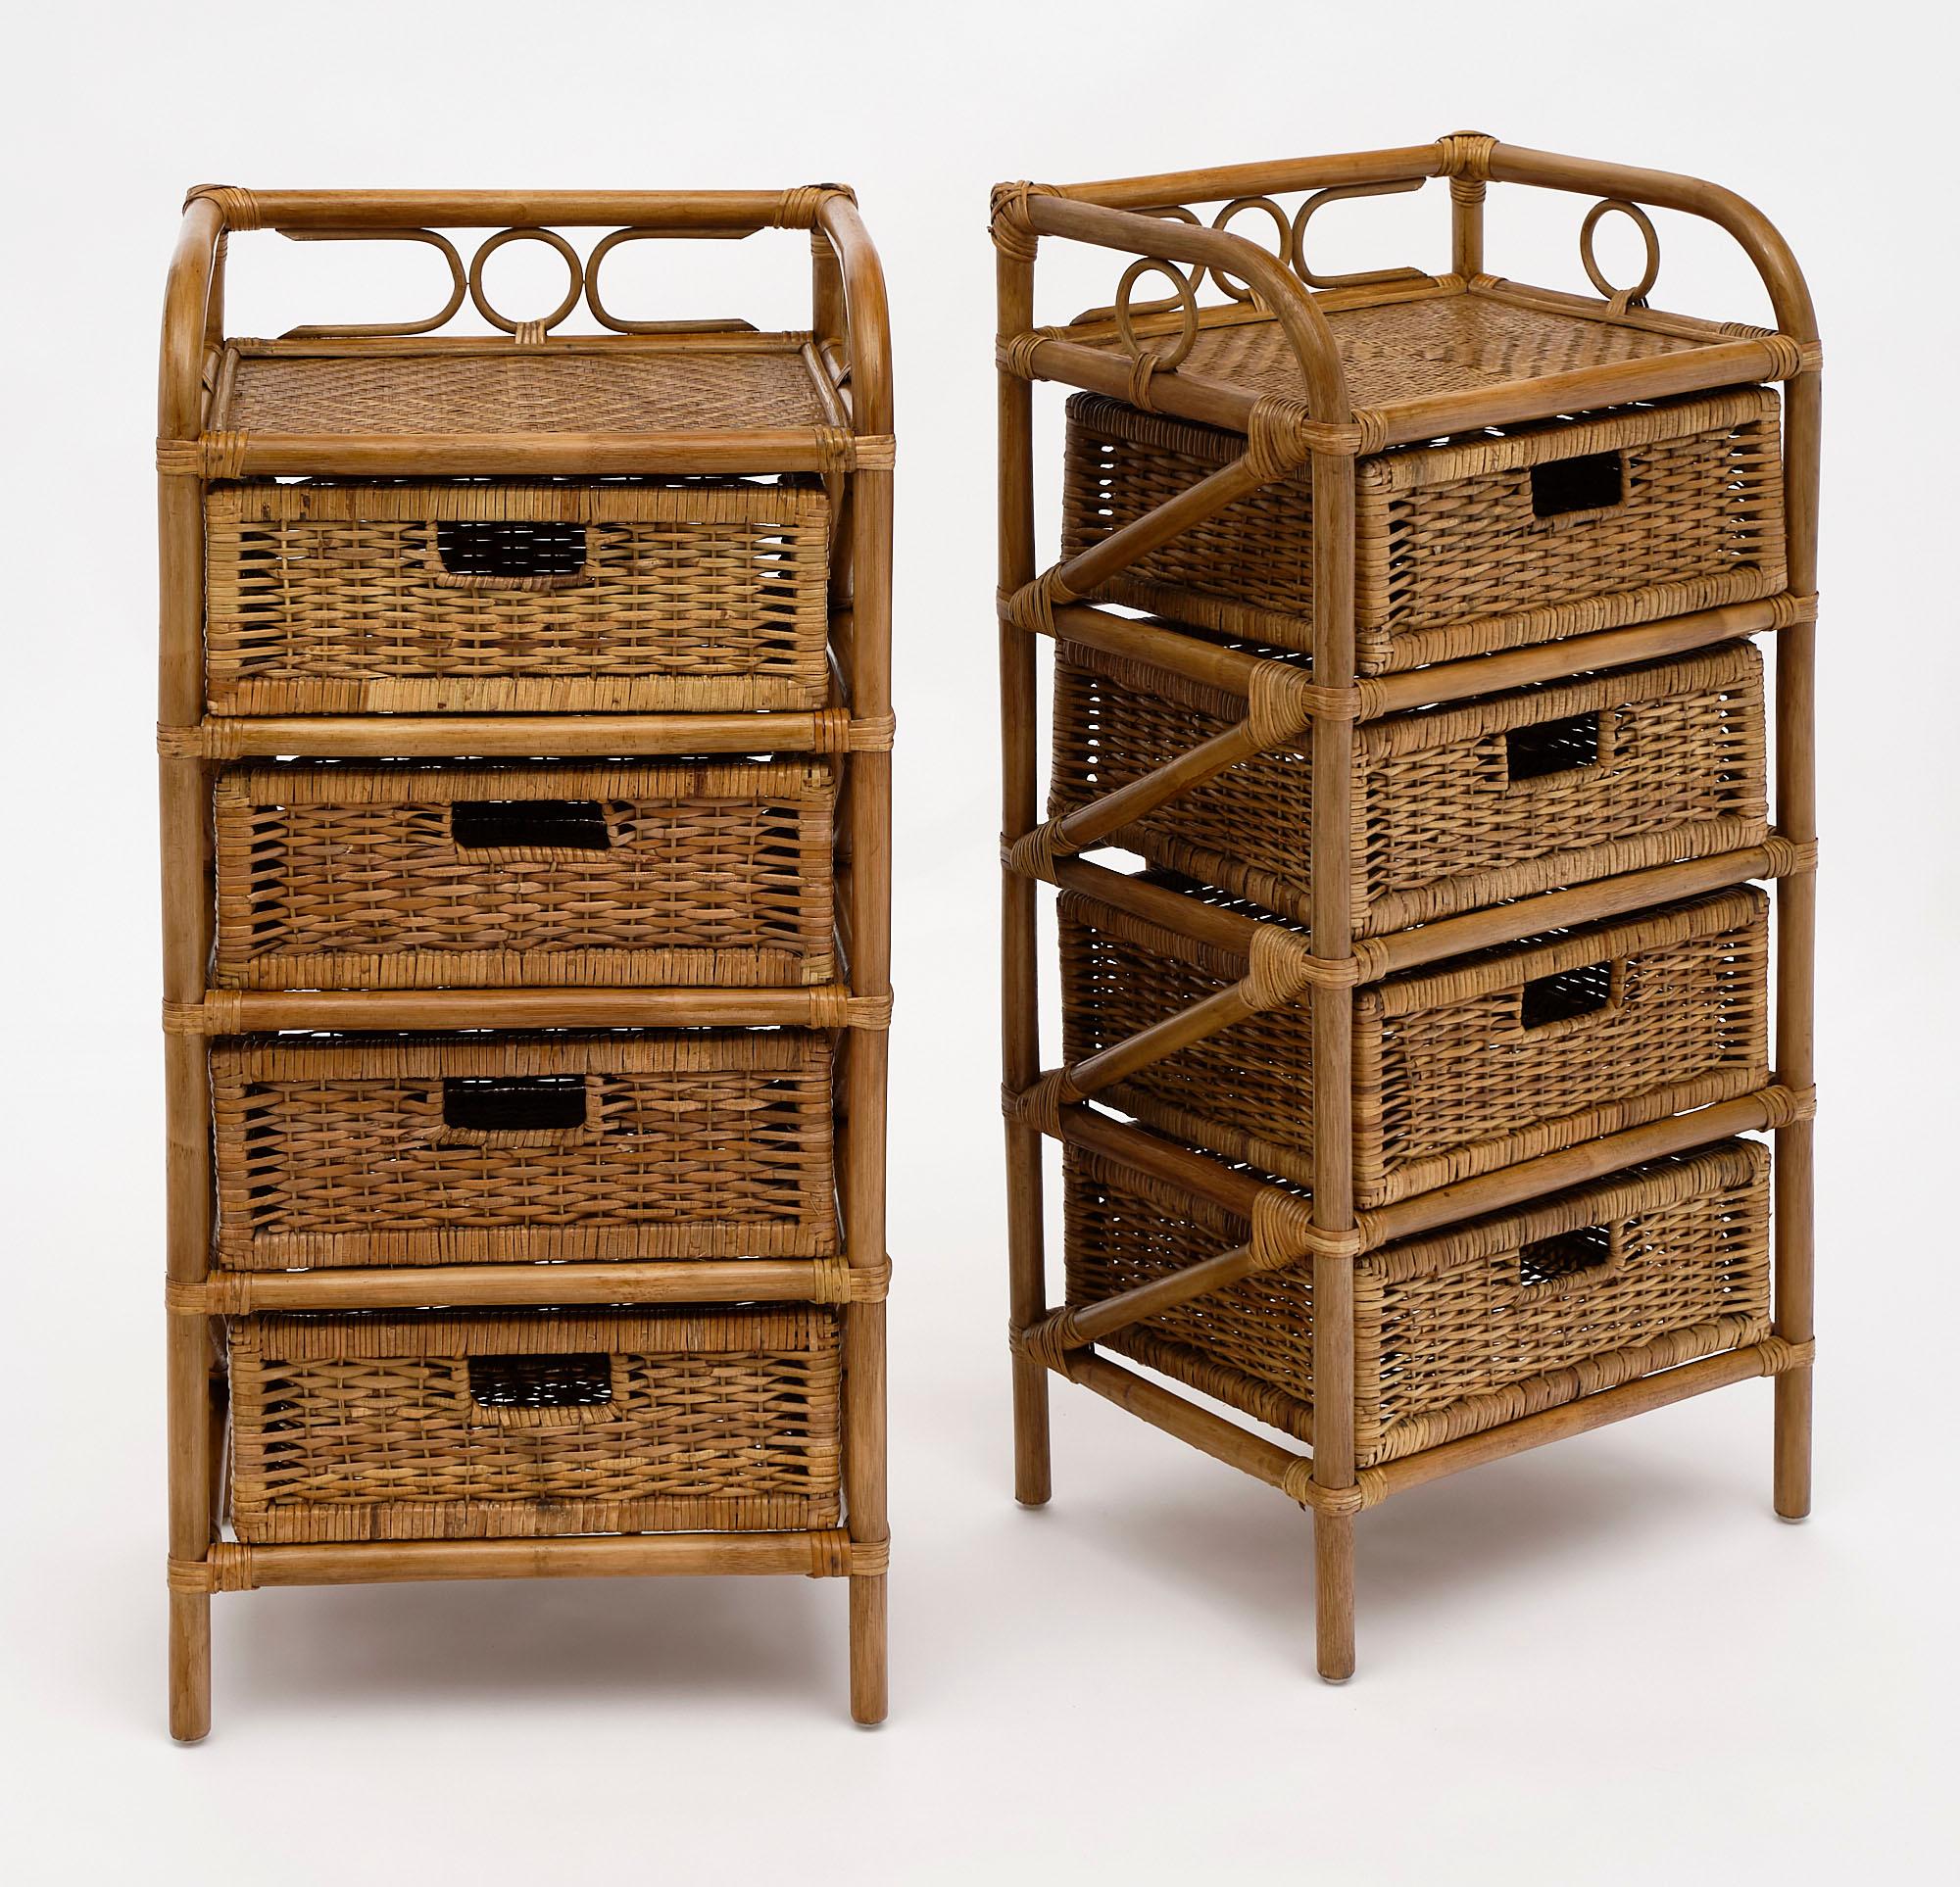 Bamboo vintage French side tables made of rattan and wicker in the manner of Audoux Minet. Each has four drawers and a top shelf.